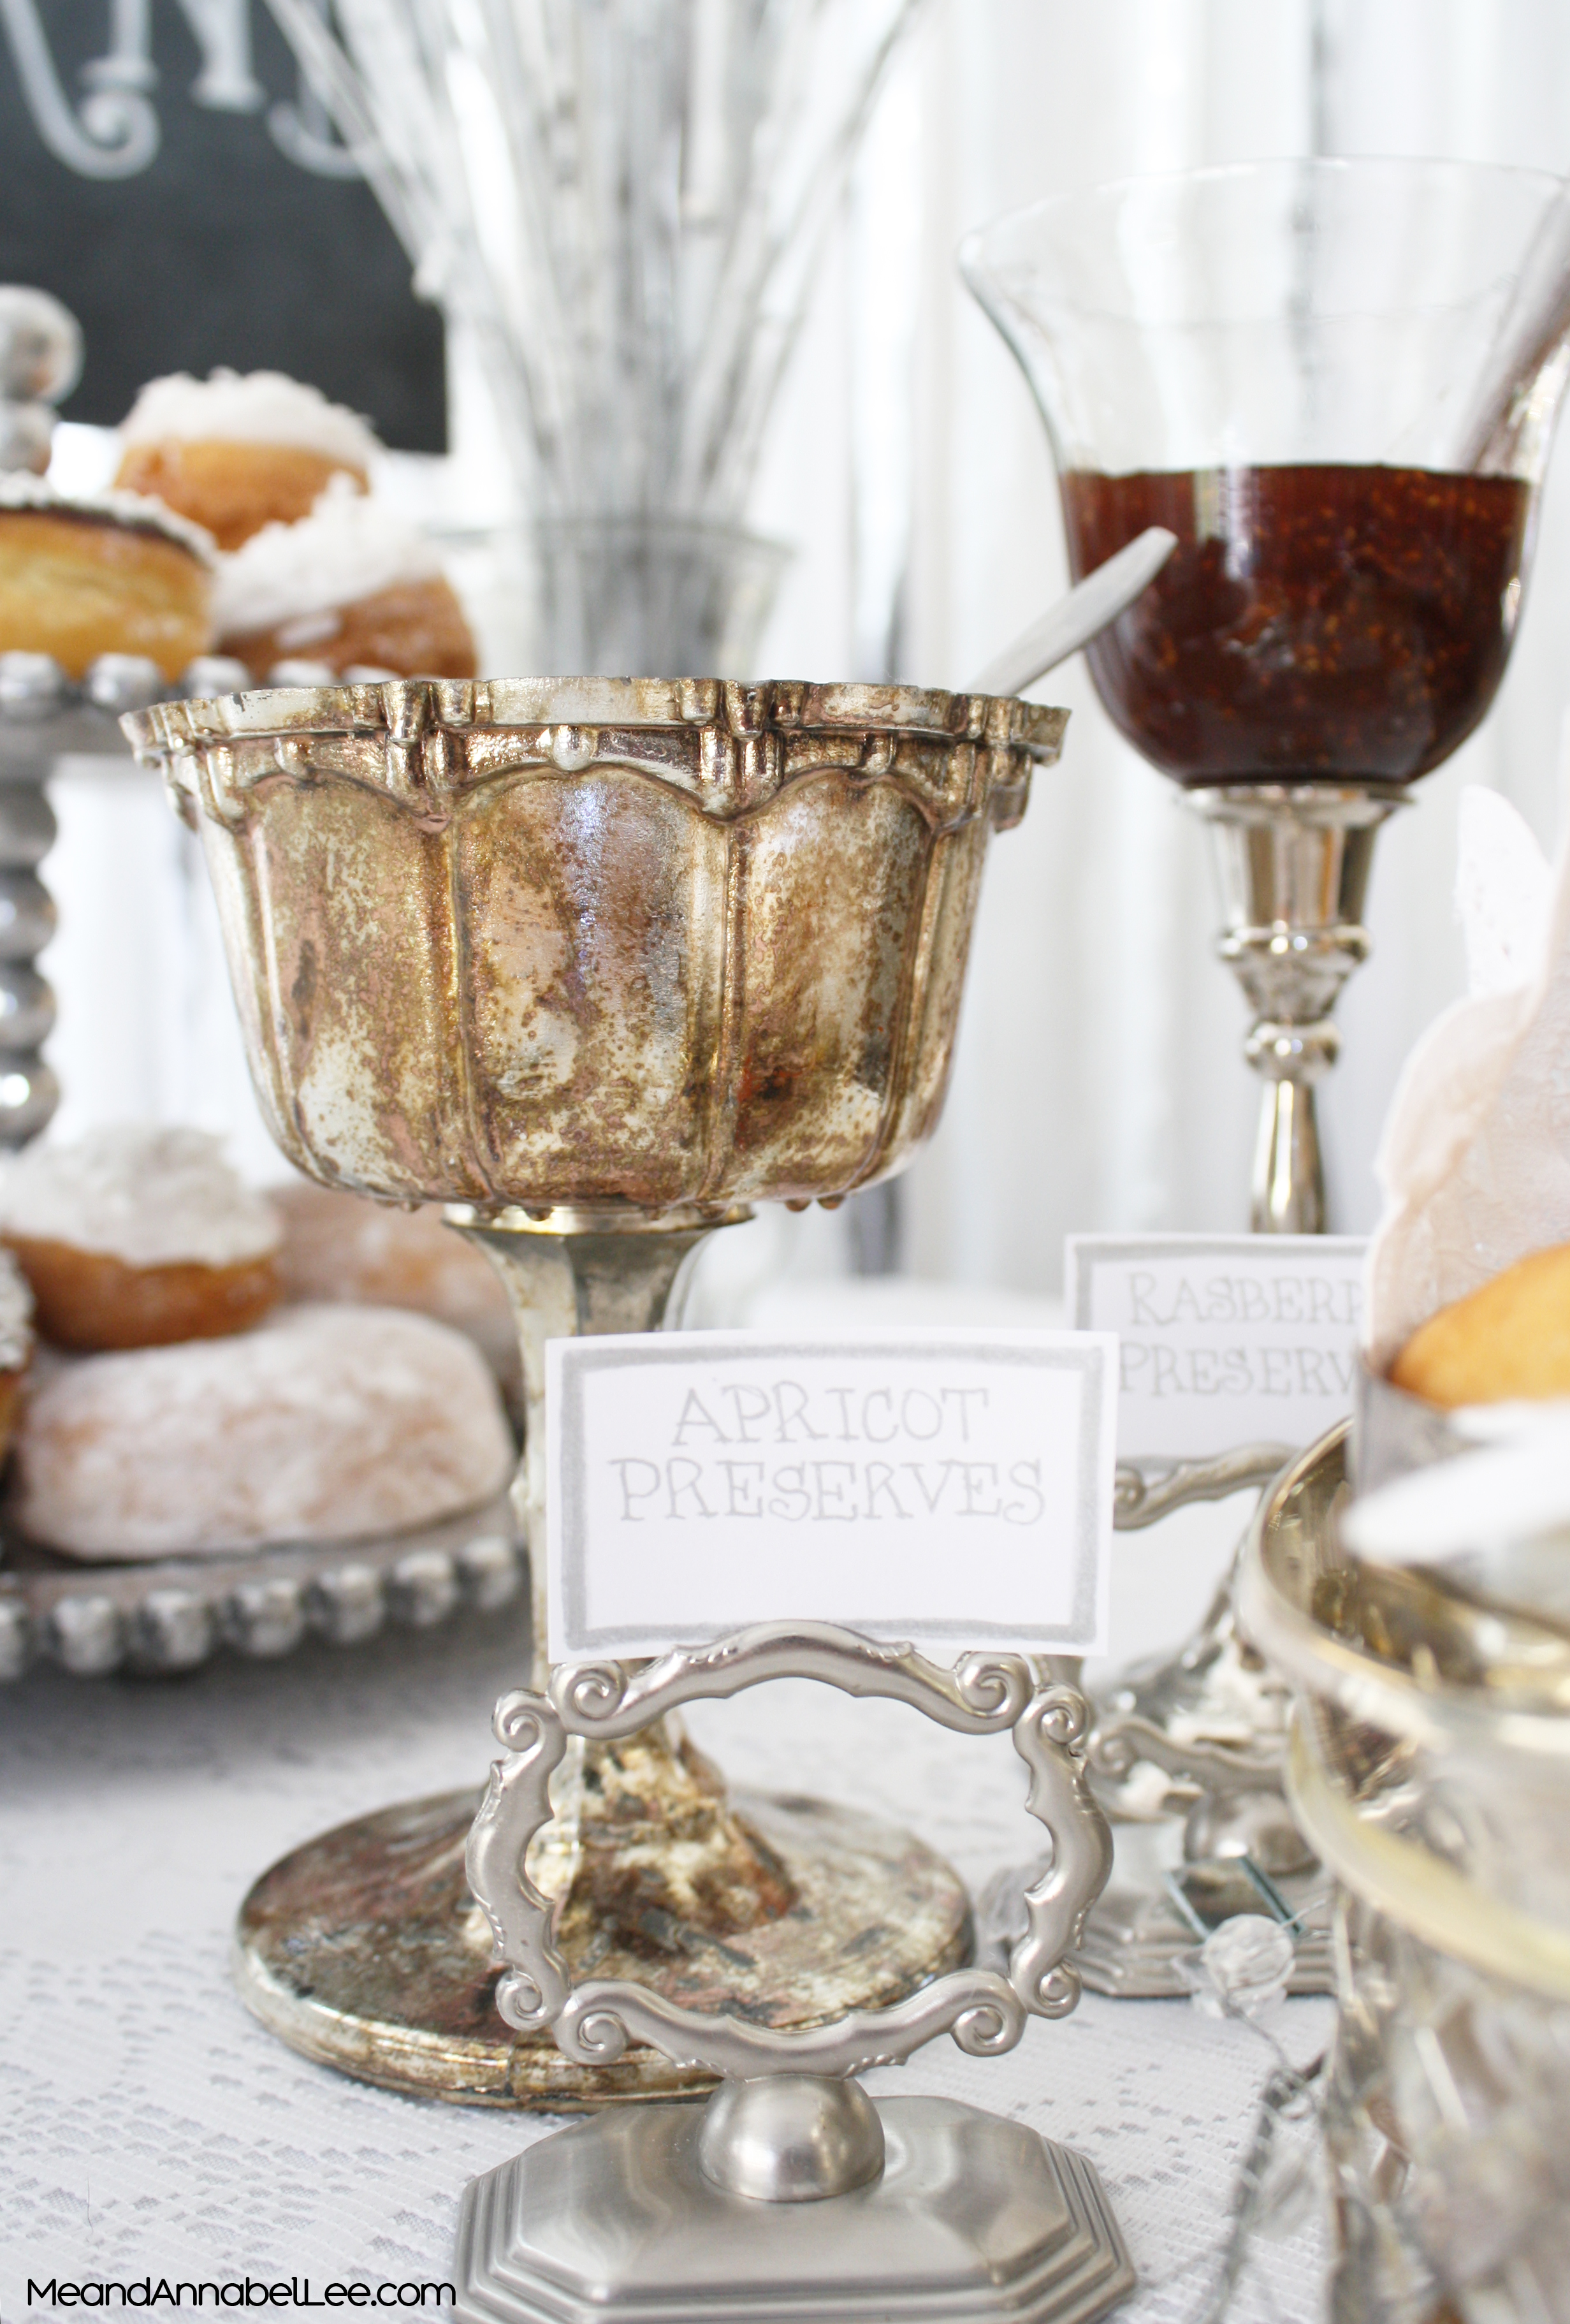 A Winter White Wonderland Brunch Party: DIY Projects, Trash to Treasures, Recipes, and more! www.MeandAnnabelLee.com